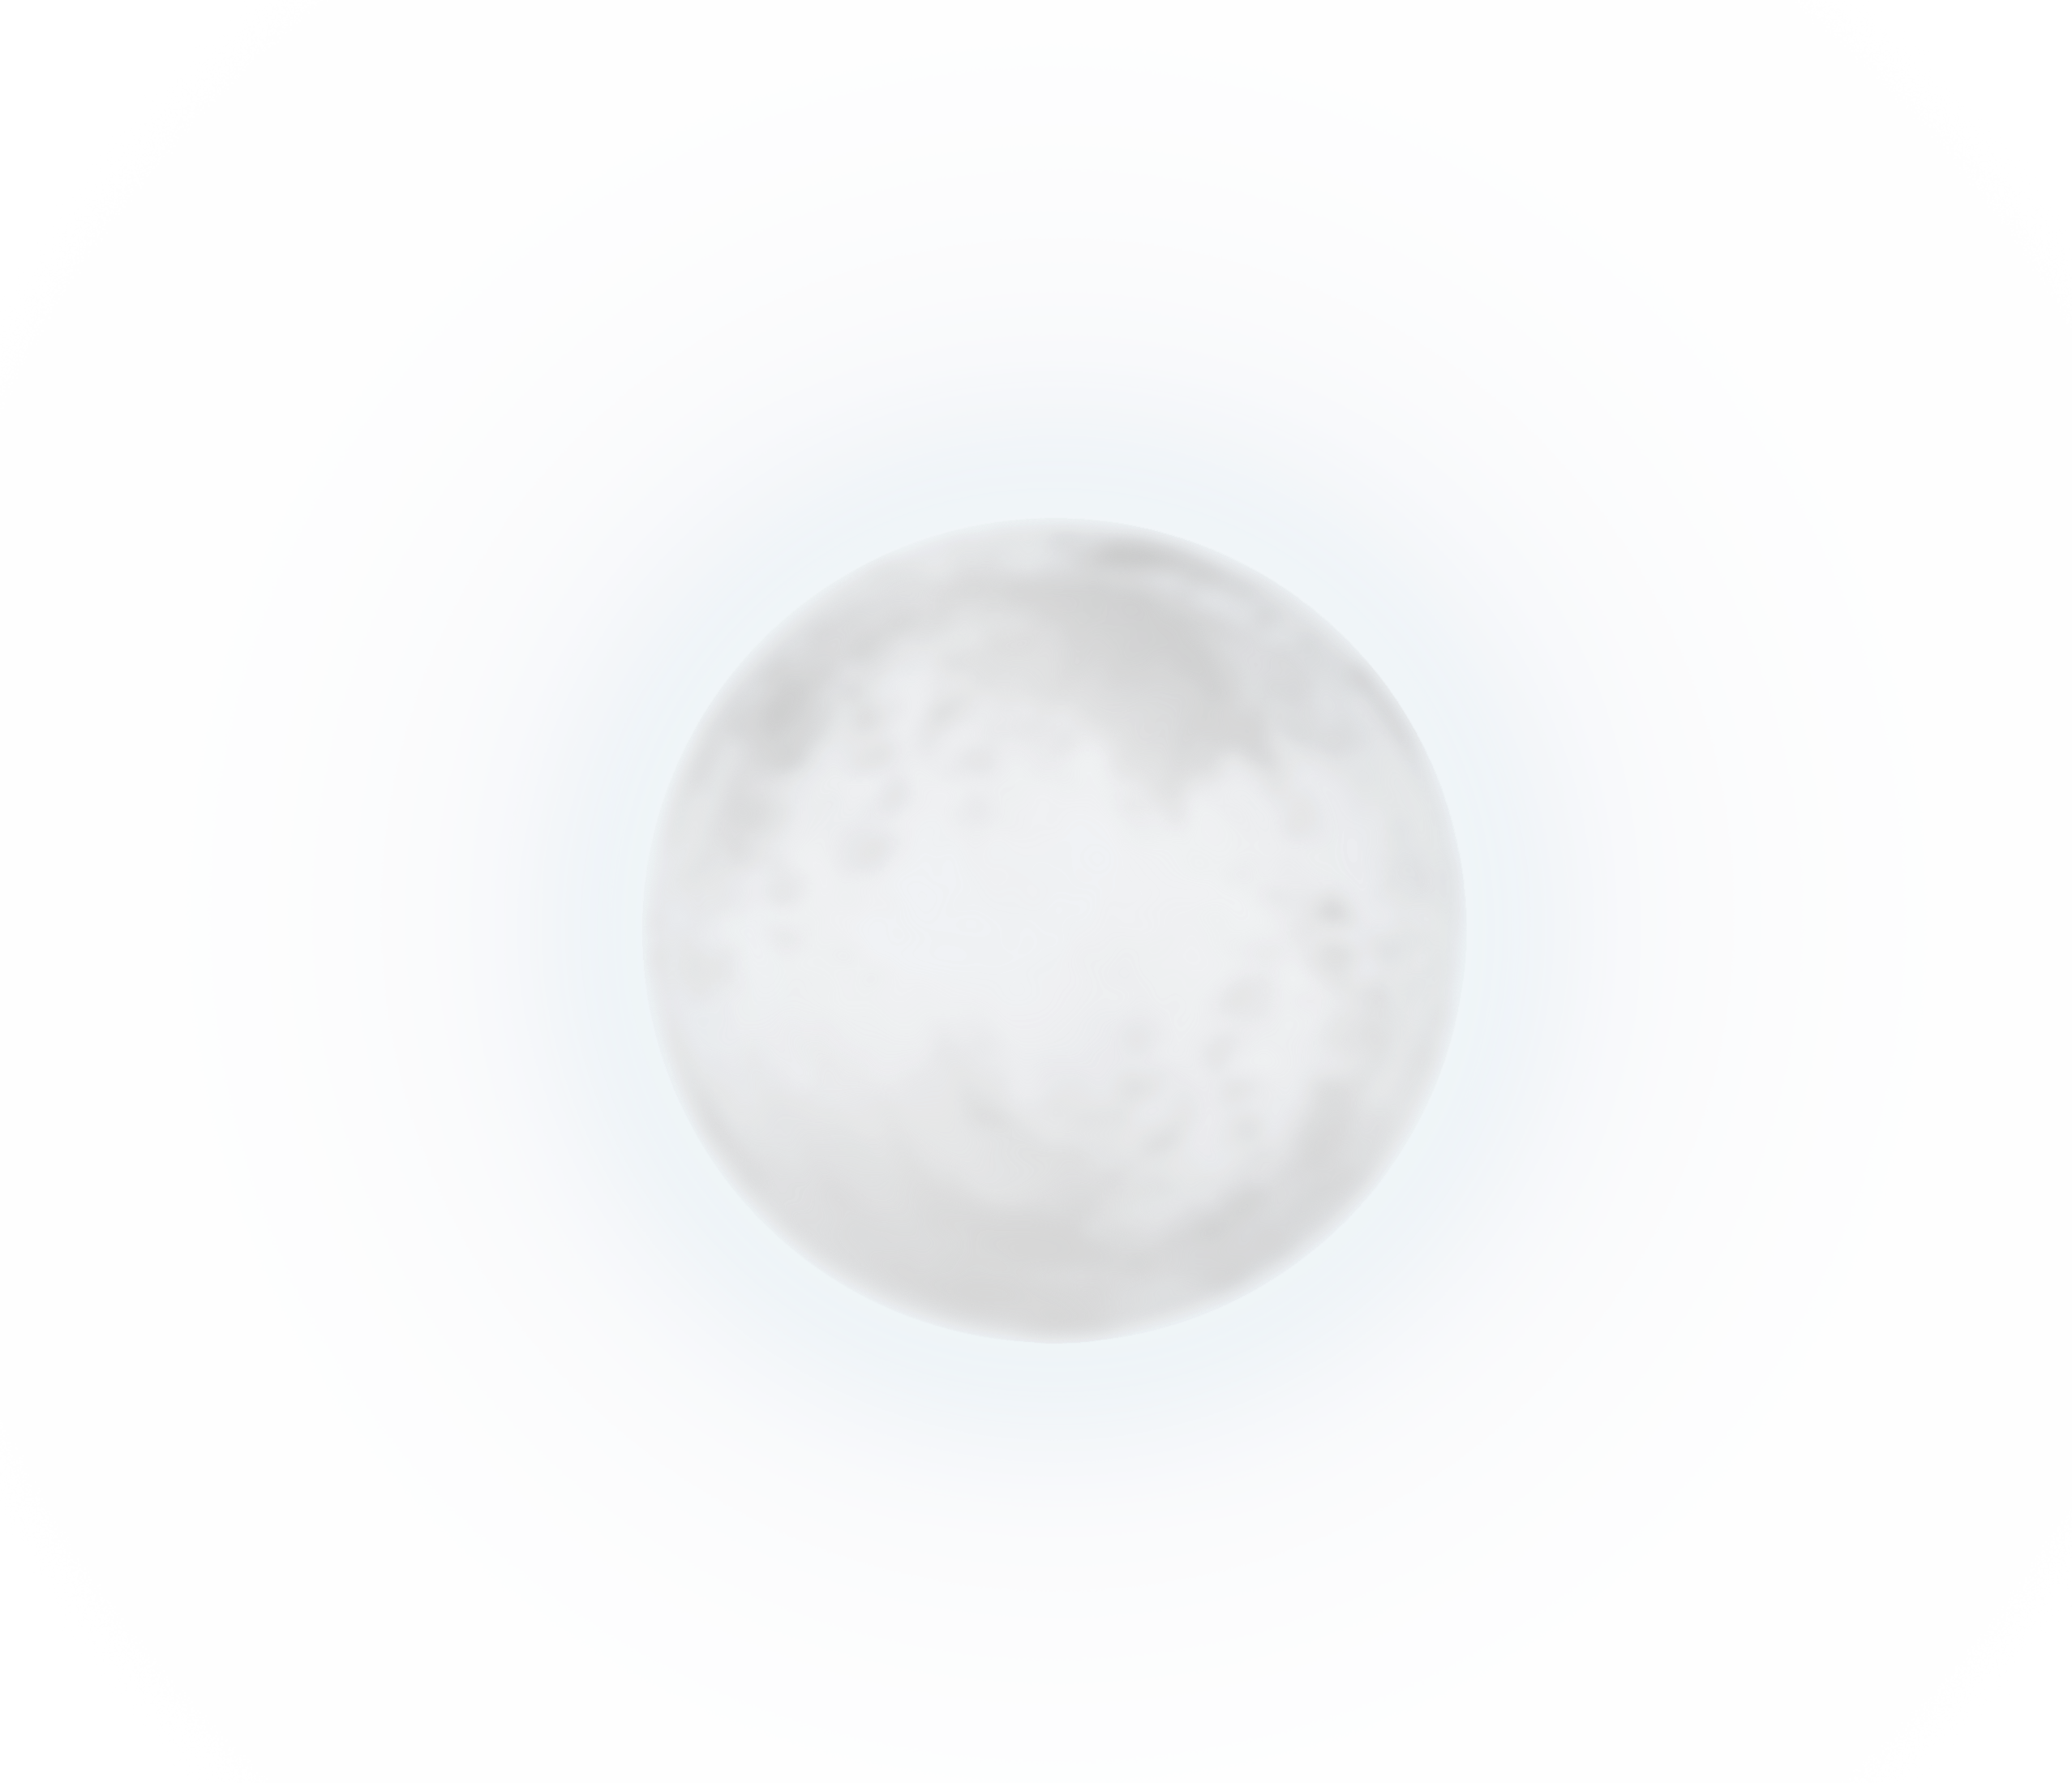 moon clipart png - photo #39